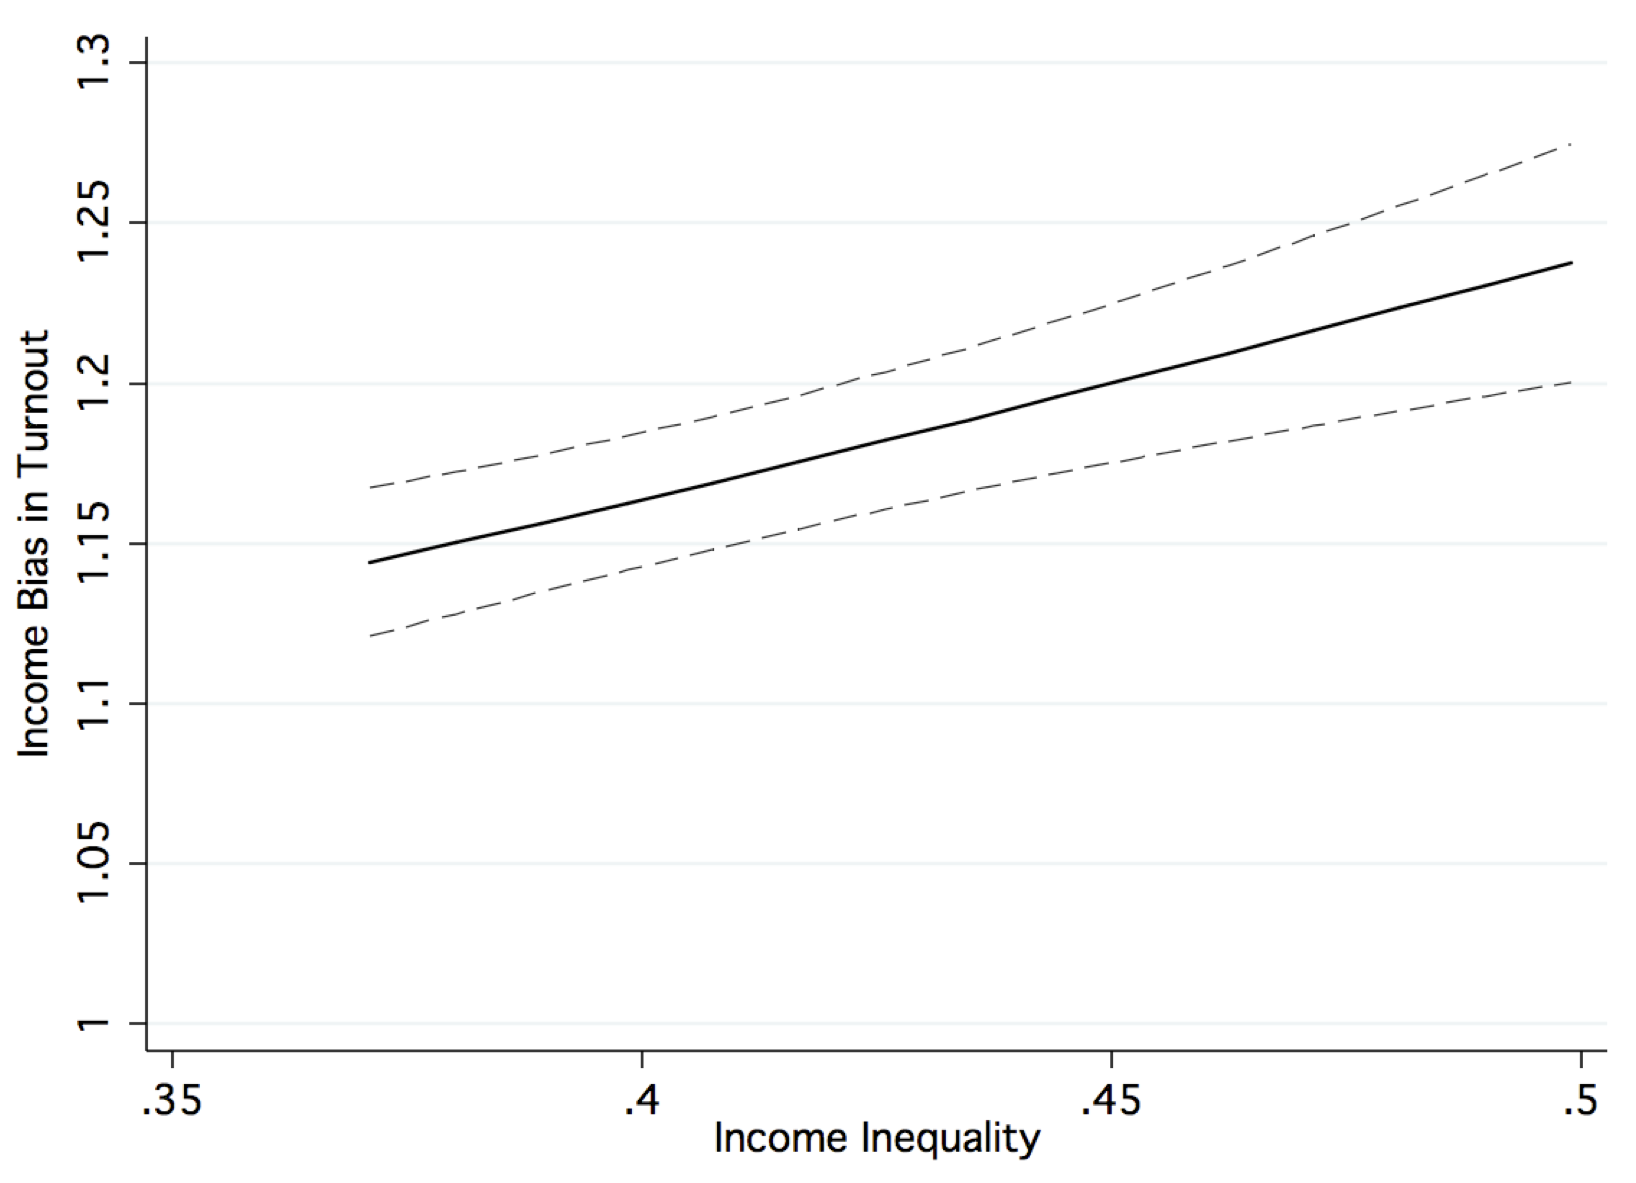 Figure 2: Estimated Income Bias by Level of Income Inequality